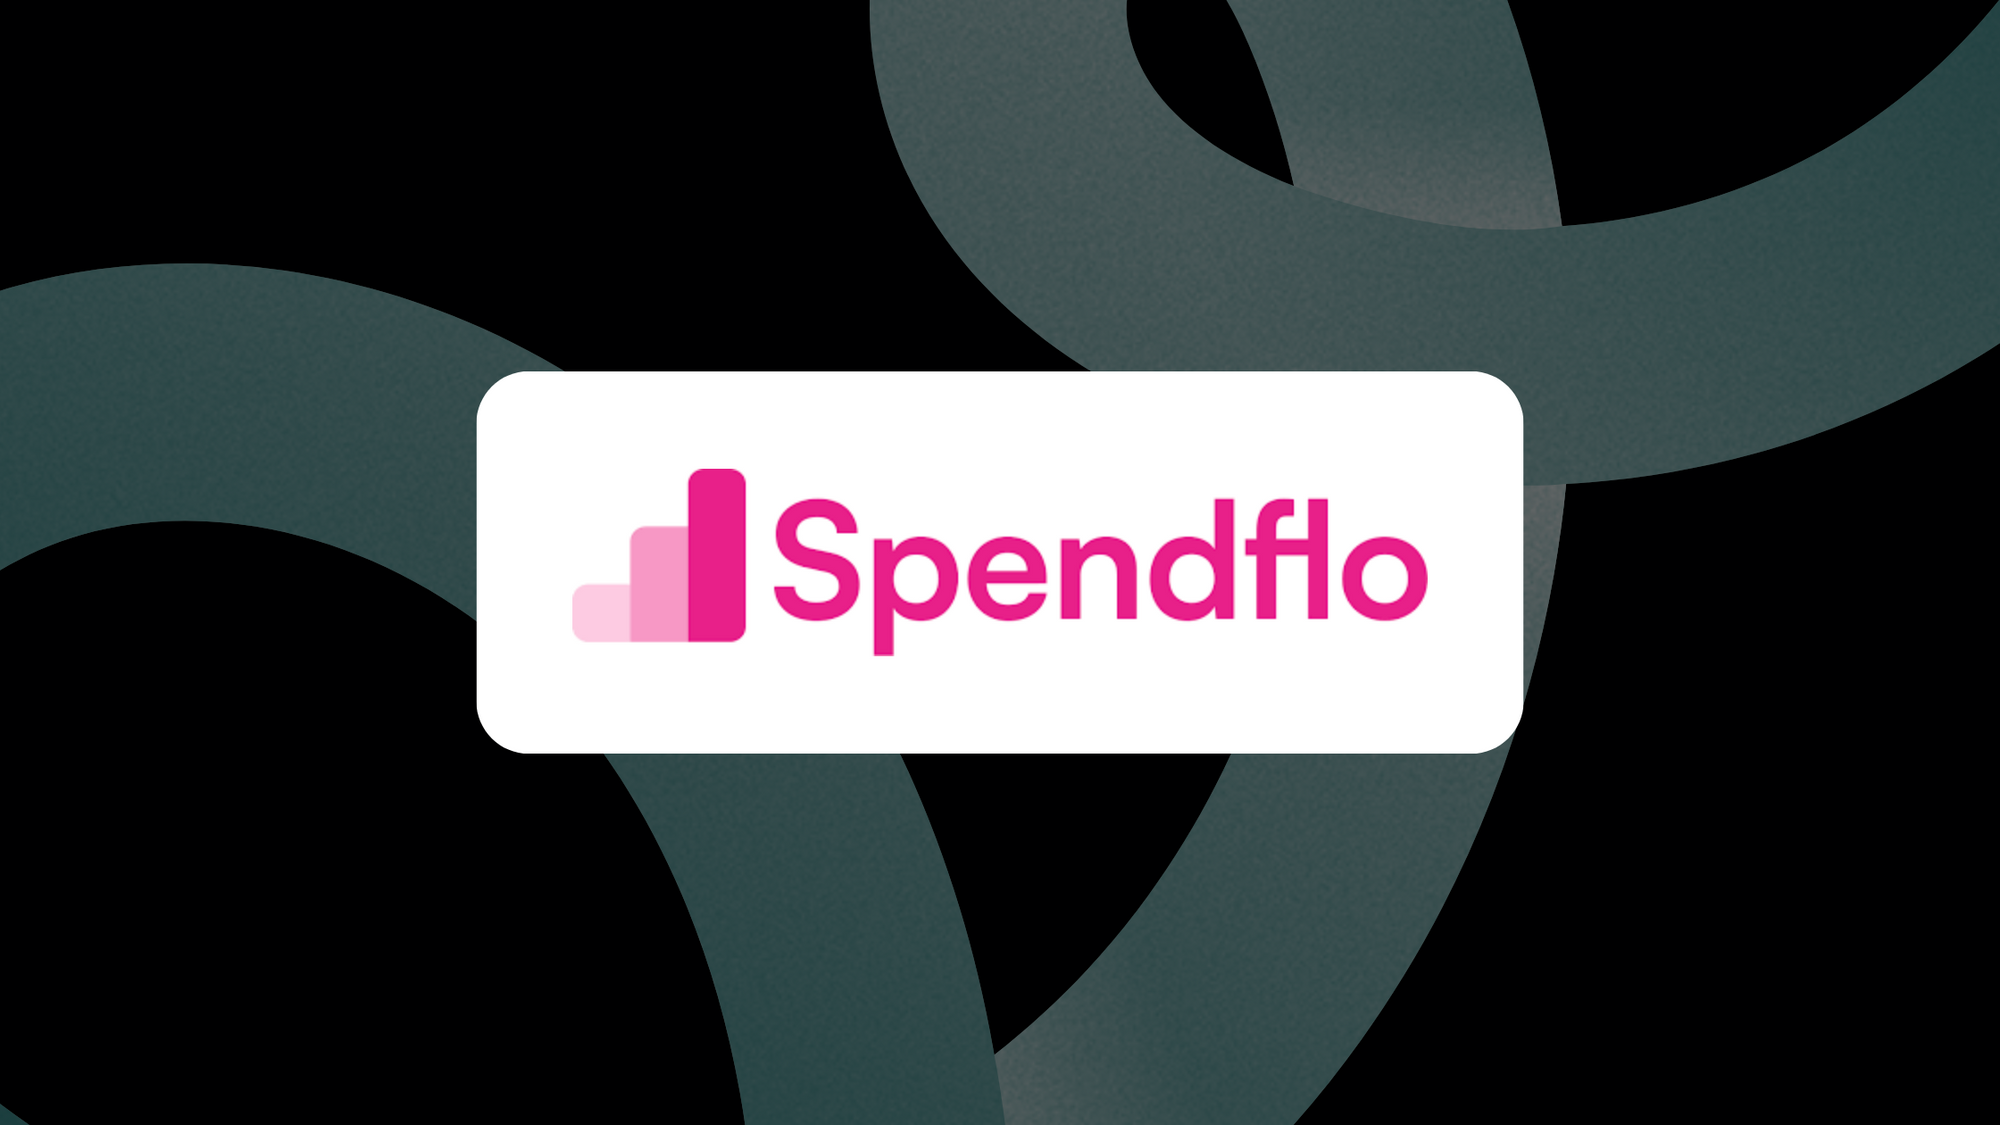 How Truto collaborated to supercharge Spendflo’s SaaS Operations